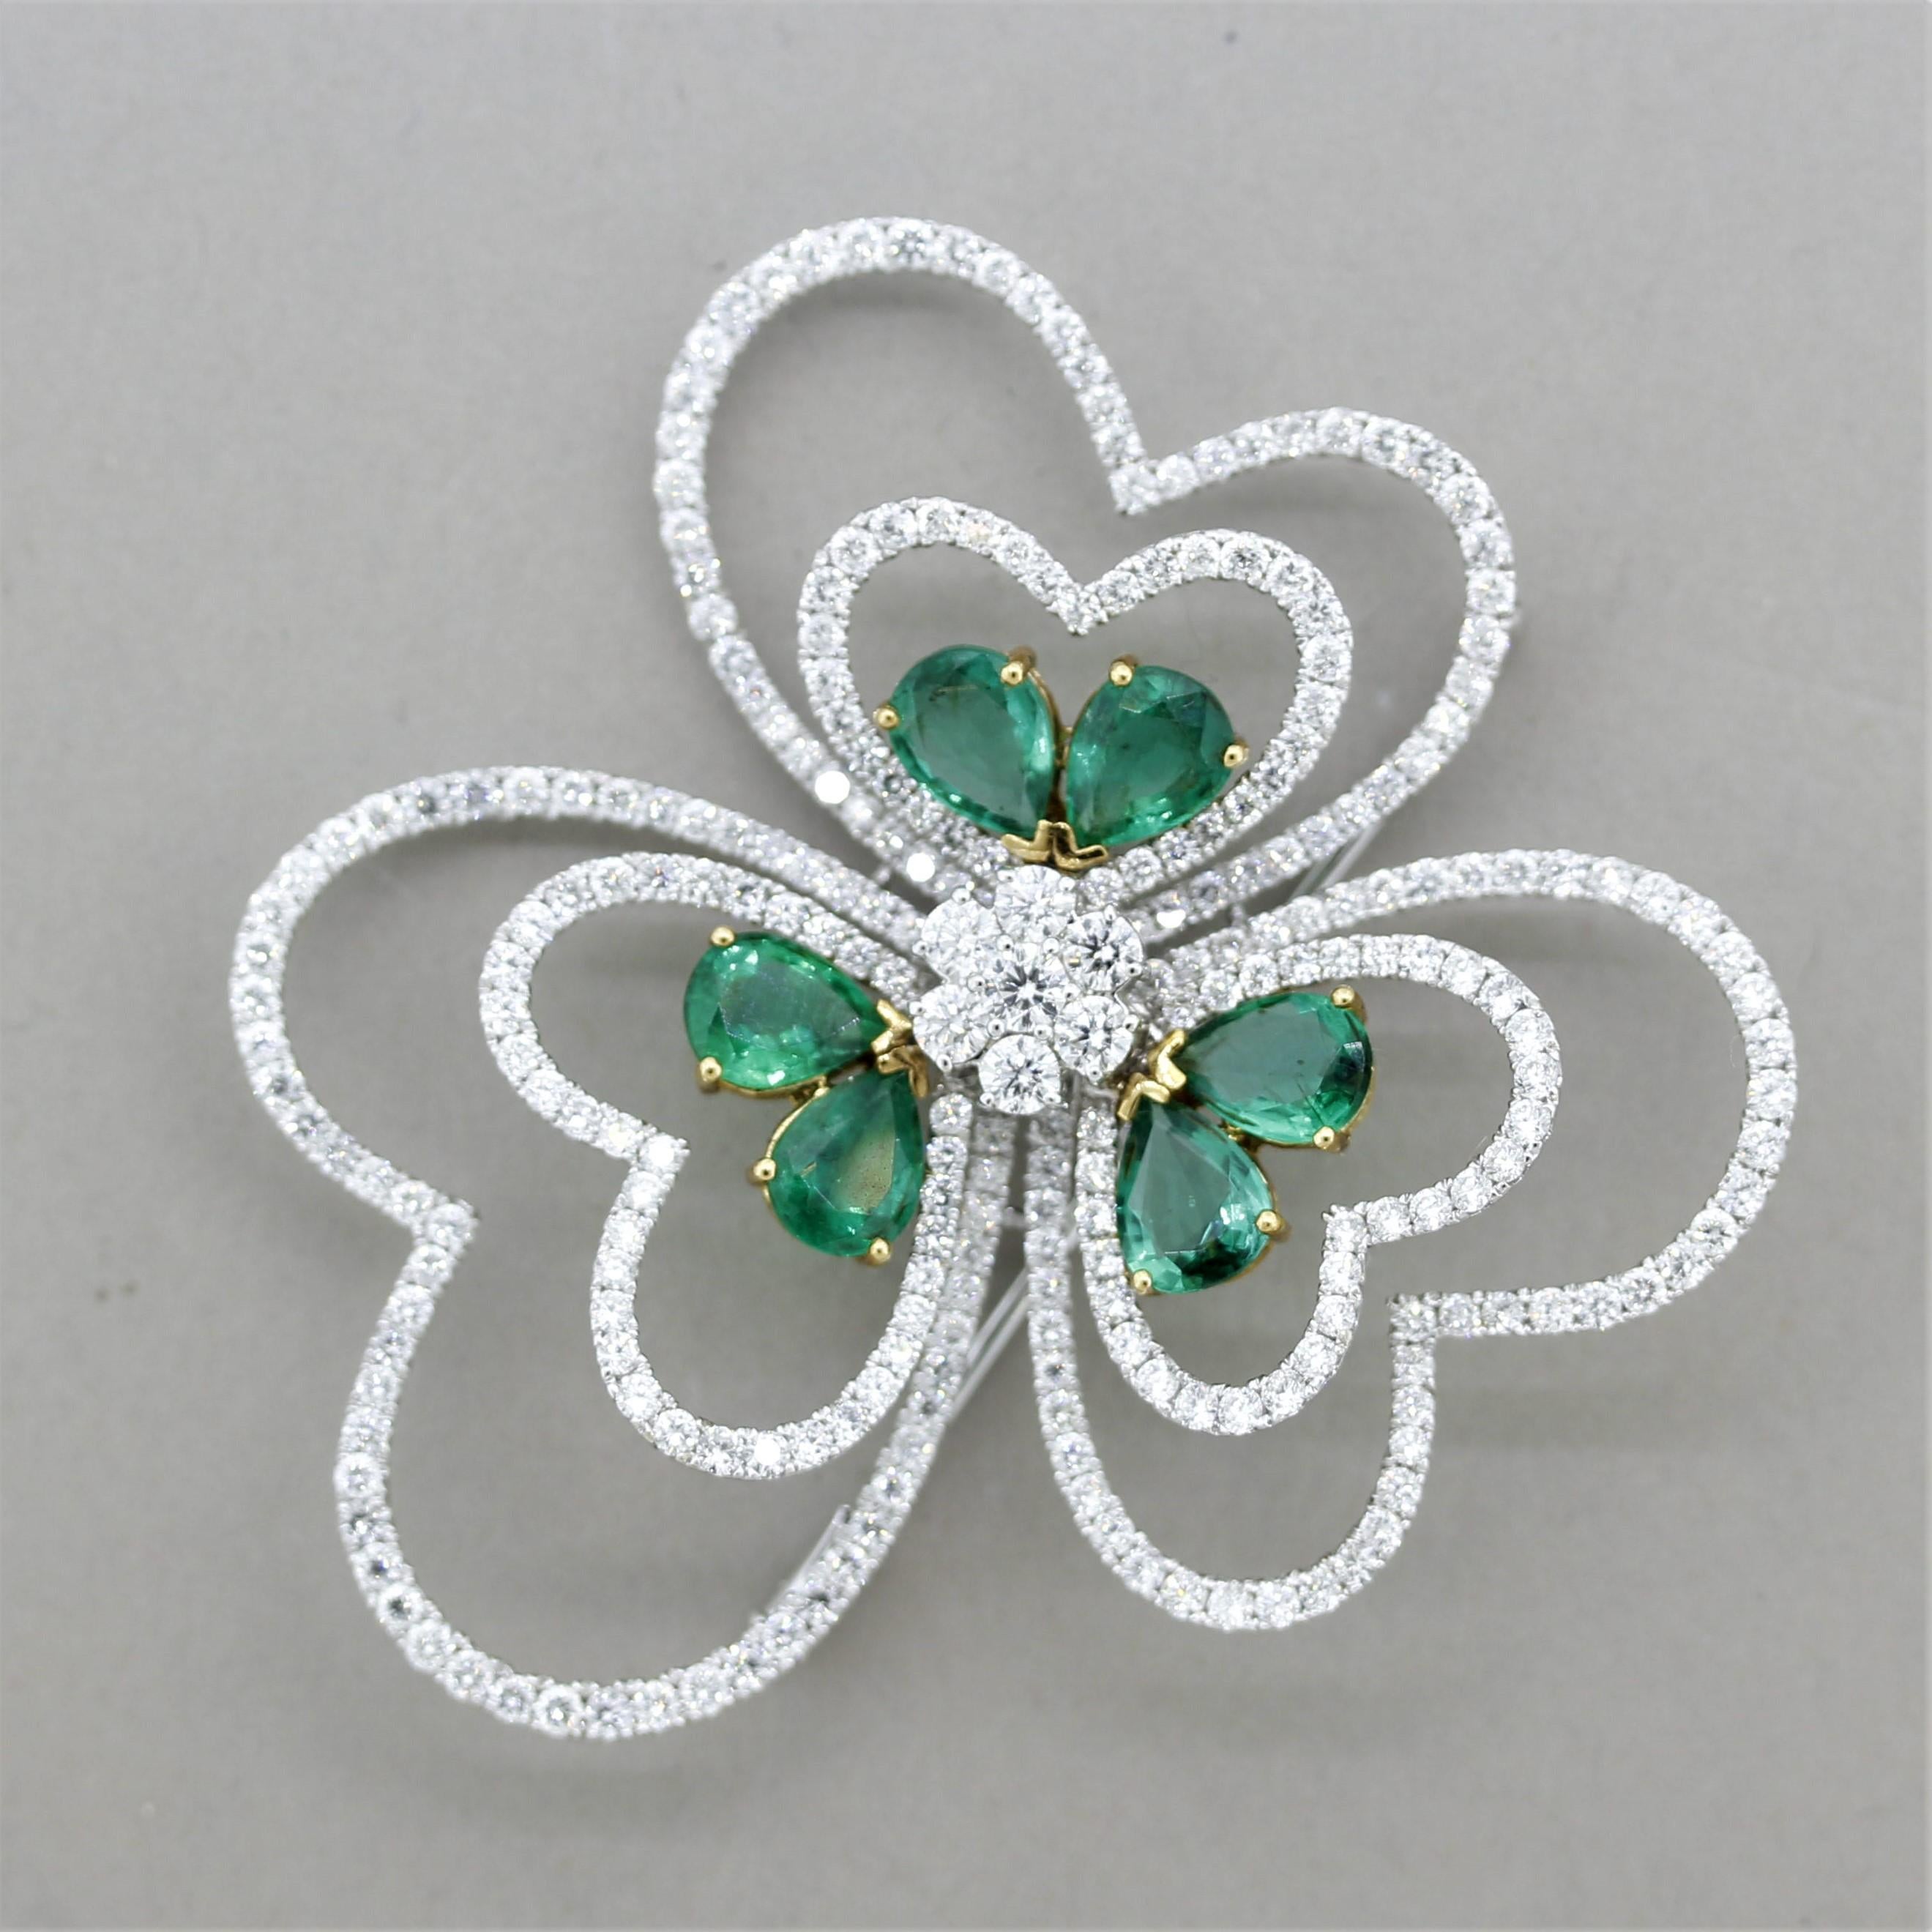 A stylish brooch full of love! It features 5.70 carats of pear-shaped emeralds. Adding to that are 5.59 carats of round brilliant-cut diamonds, cluster-set in the center of the flower as well as on the outer heart petals. Large but light enough to